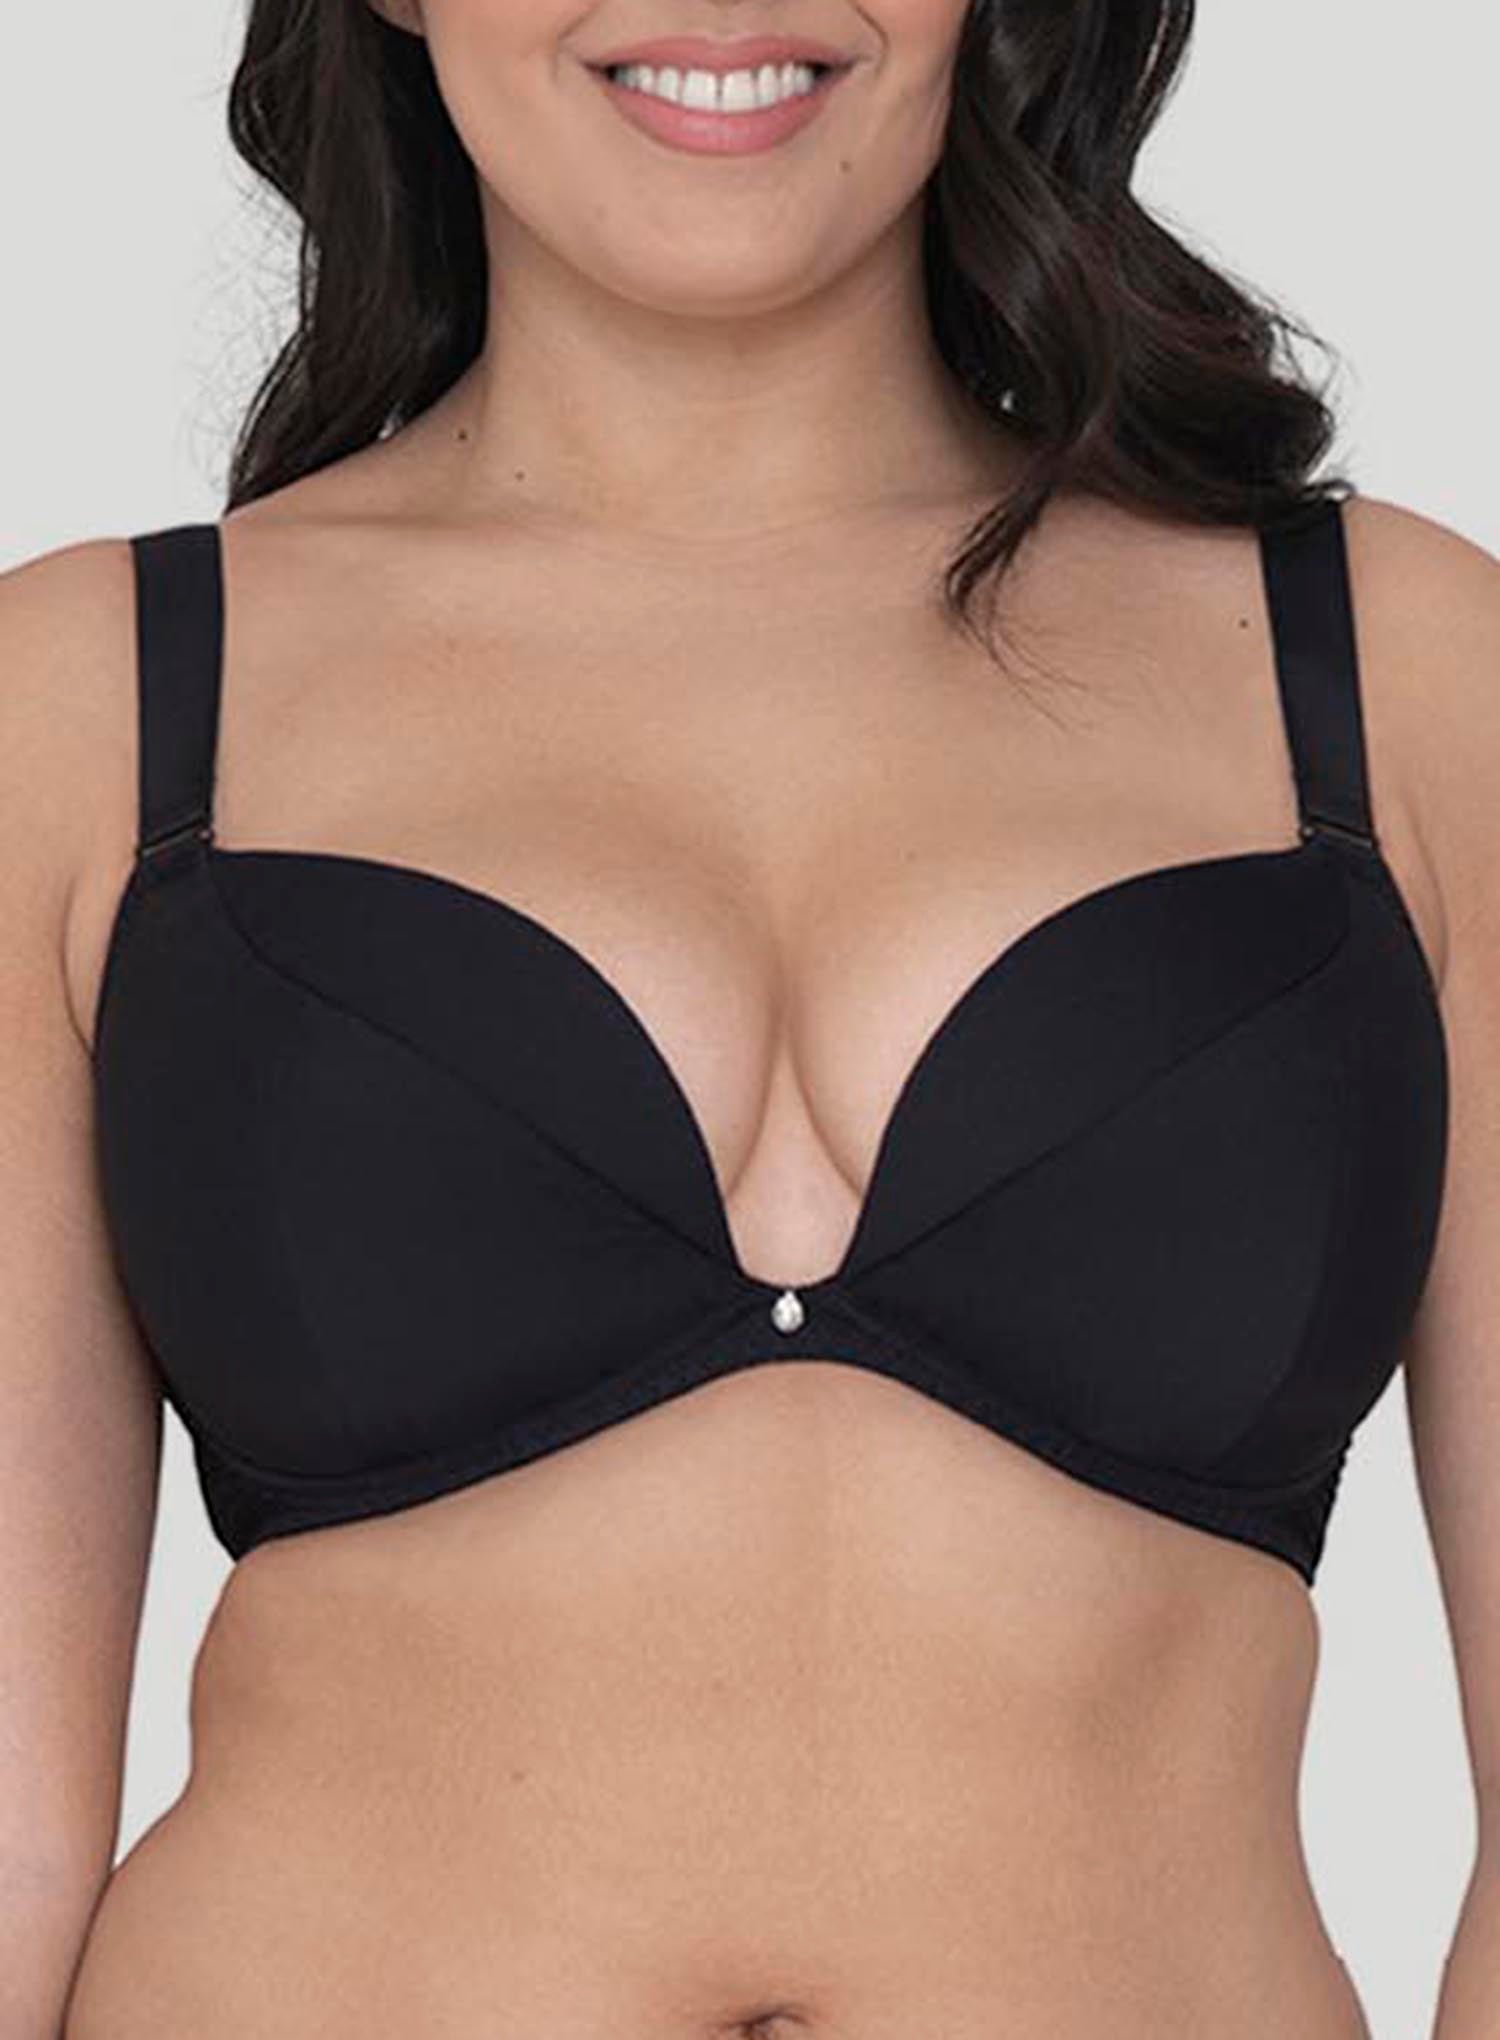 Curvy Kate - It's the same fit from our SuperPlunge multiway bra which we  all know and love, except it just got a front fastening refresh to a HH cup  making it